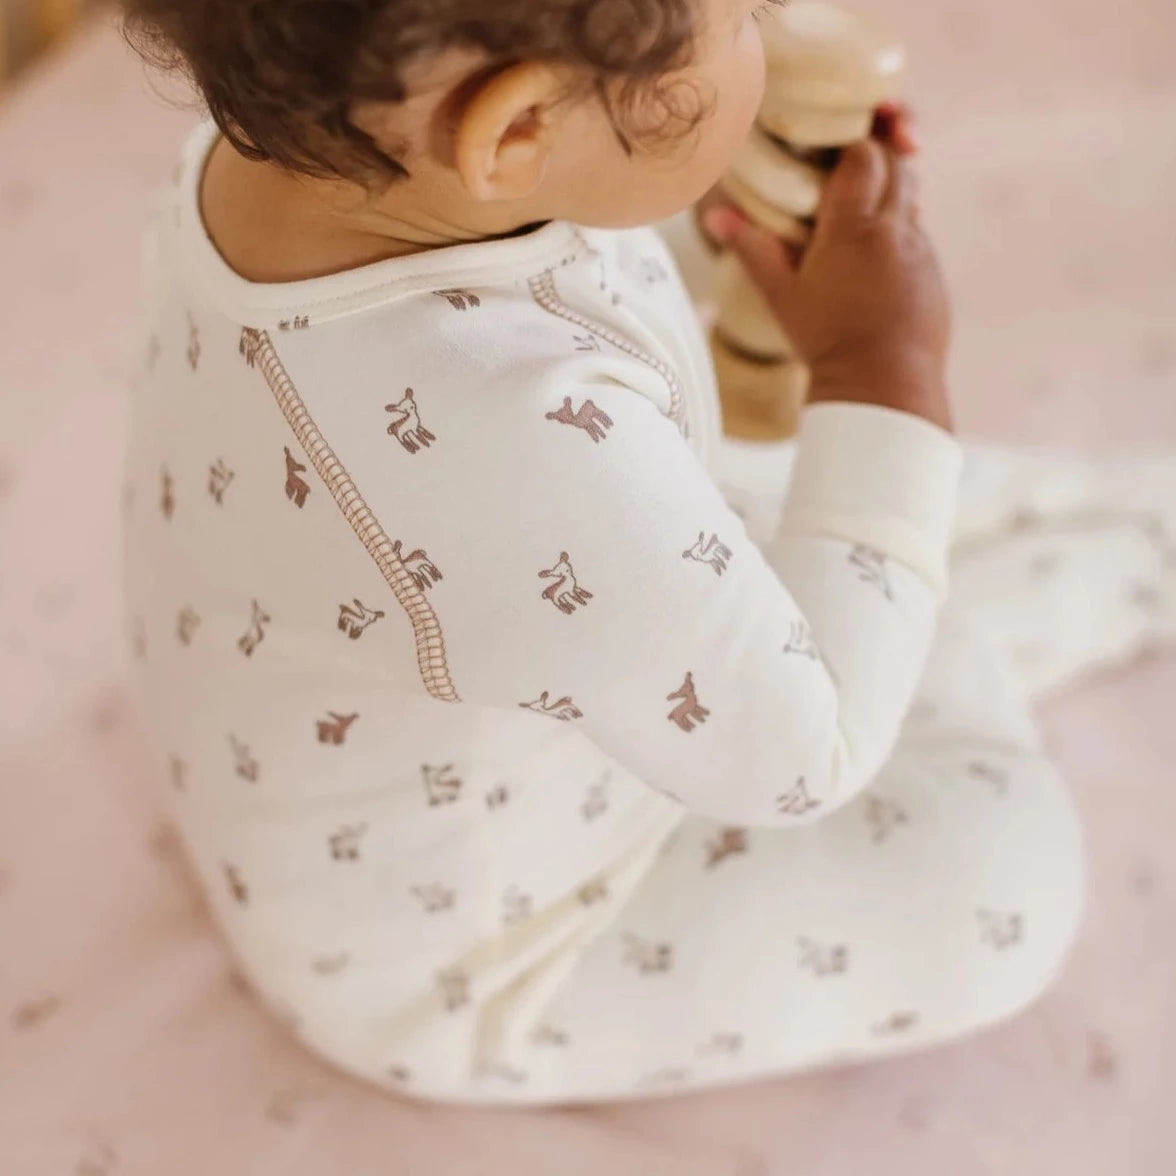 baby wearing fawn printed cream colored footsie pajamas